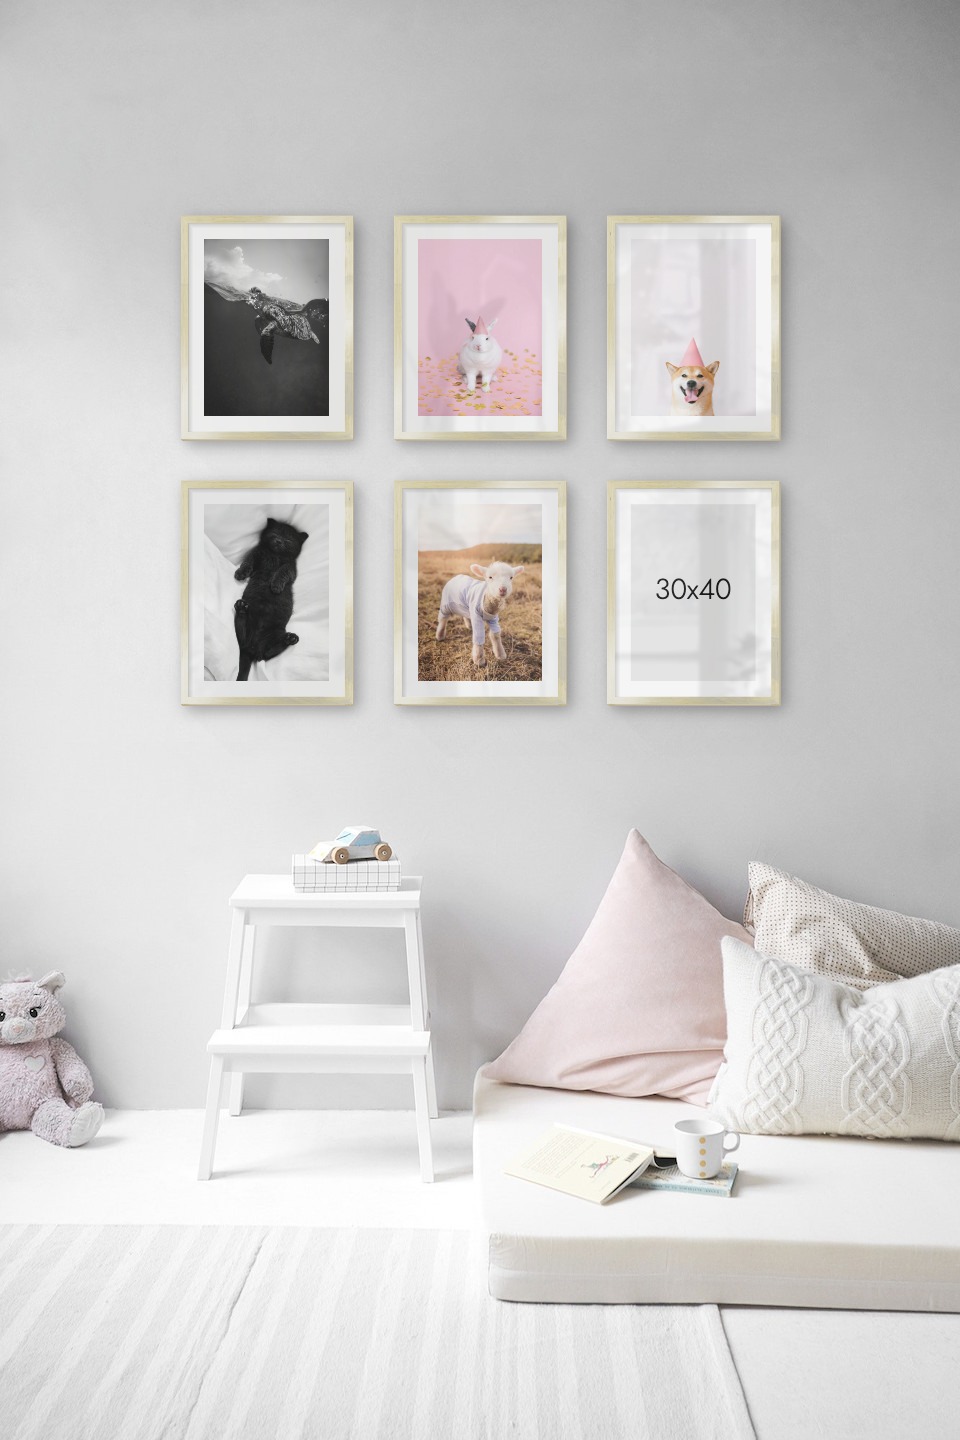 Gallery wall with picture frames in gold in sizes 30x40 with prints "Turtle", "Rabbit with party hat", "Dog with pink hat", "Cat in bed" and "Lamb"